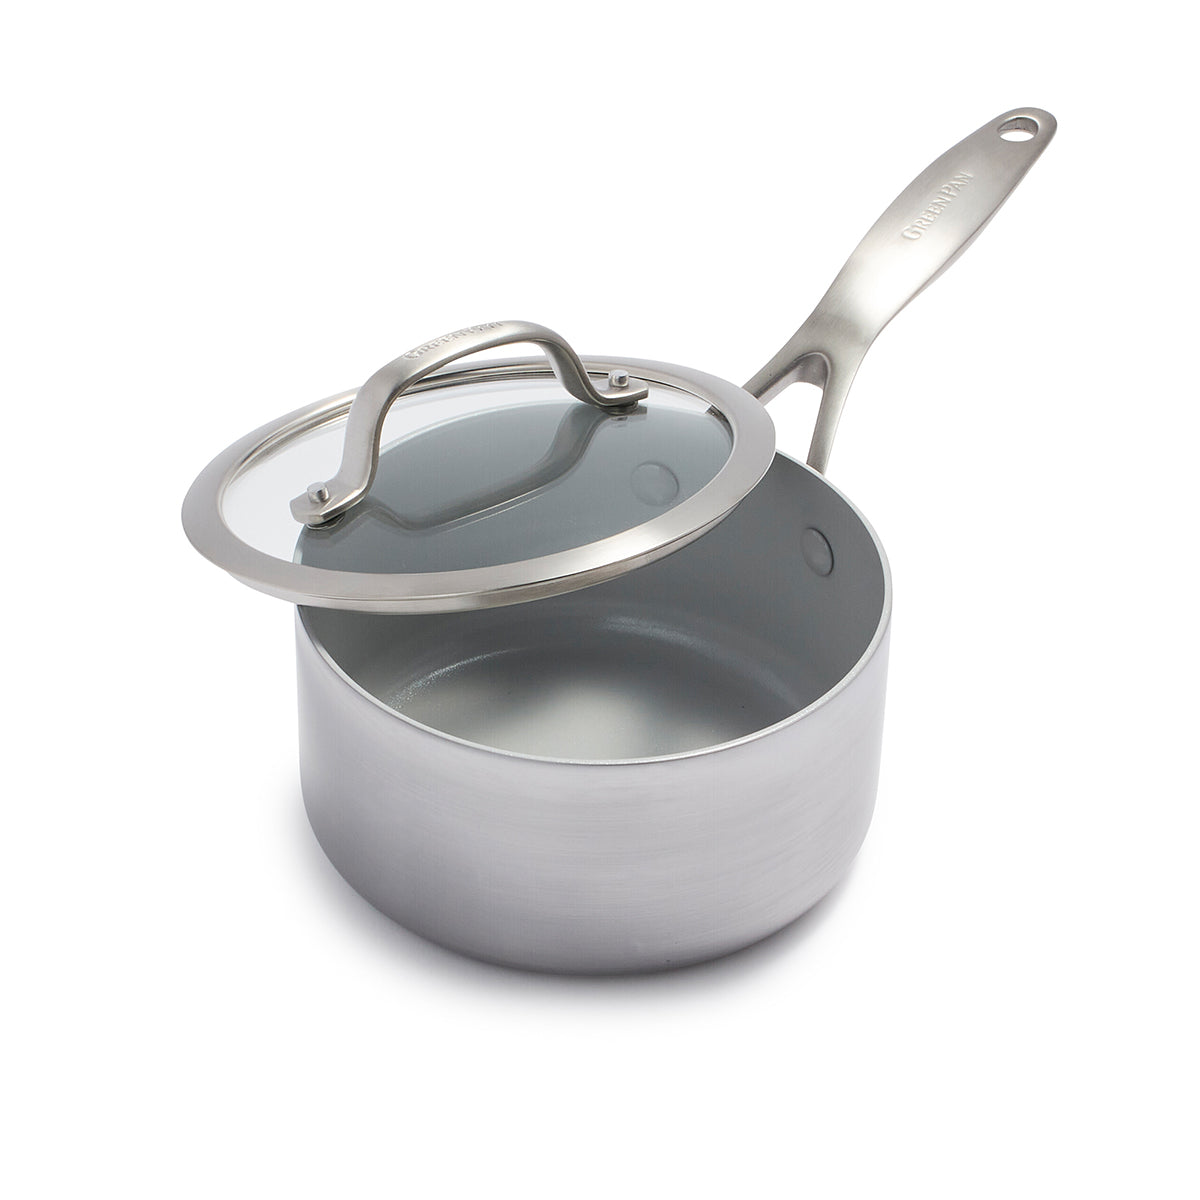 Cook N Home Saucepan Sauce Pot with Lid 1 Quart Stainless Steel